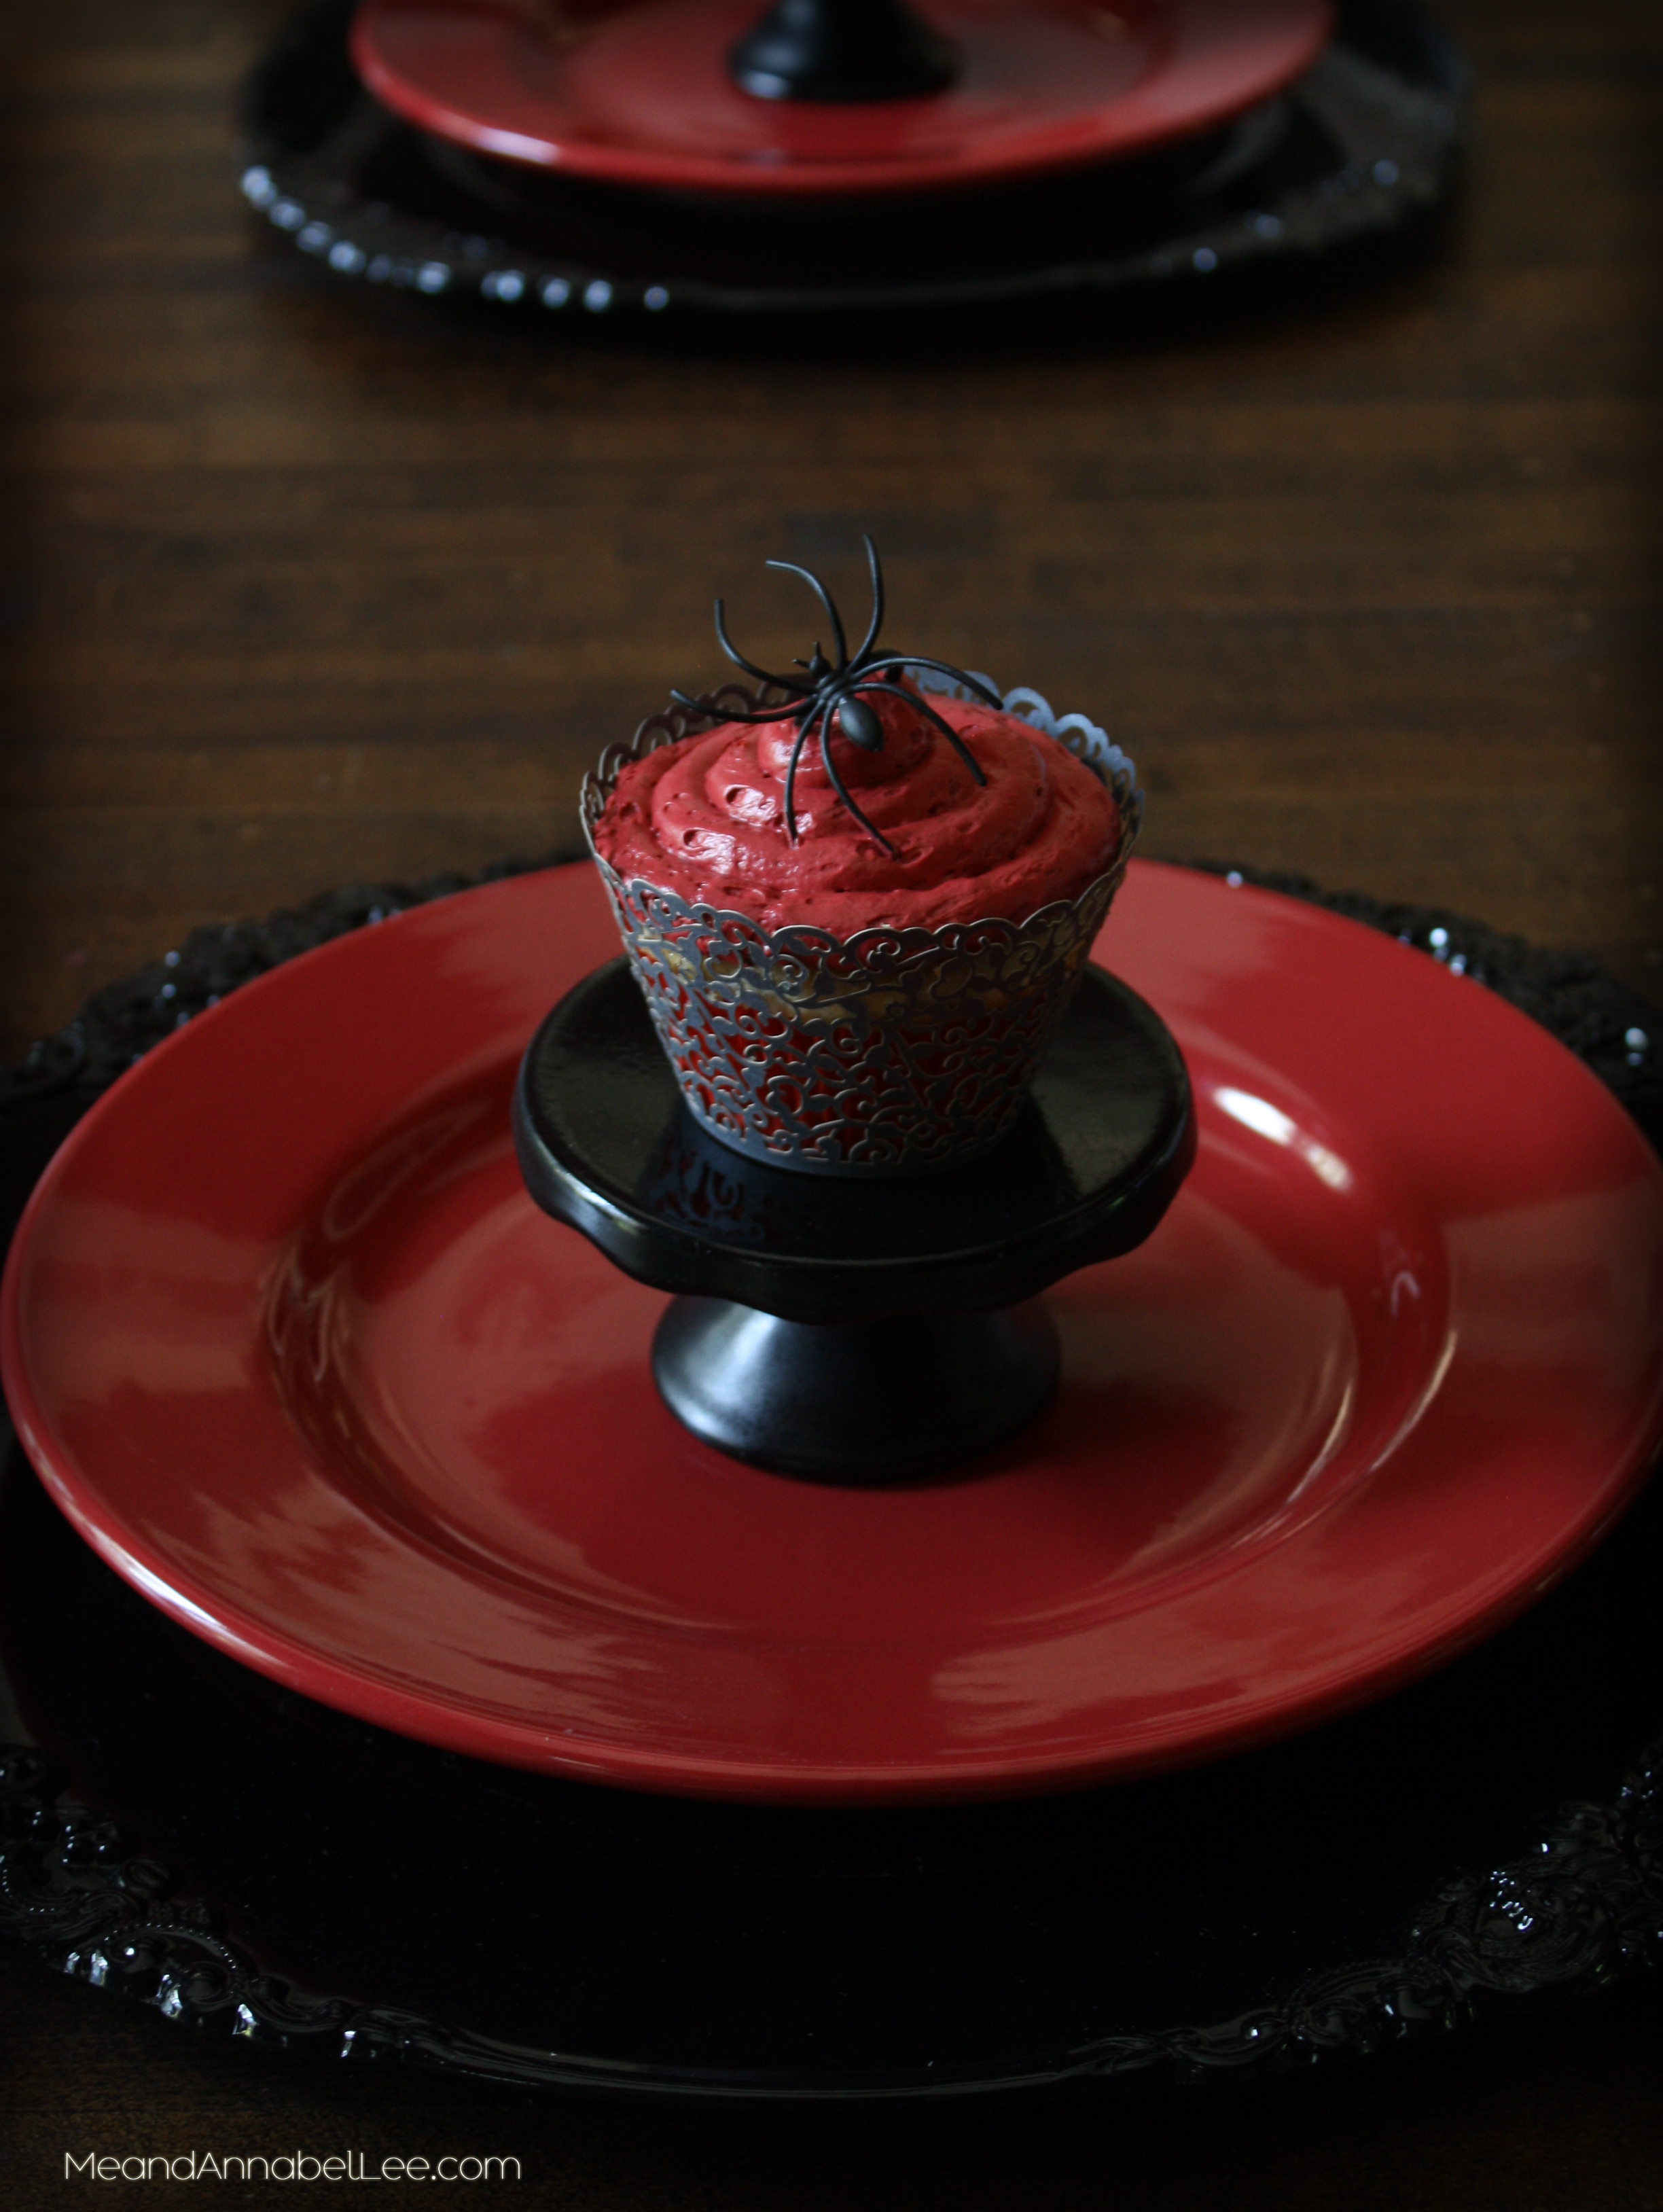 DIY Black Widow Cupcake Stands - Baking like a Badass - Black Red Cupcakes - Vampire Style - Gothic Baking - Goth It yourself - www.MeandAnnabelLee.com